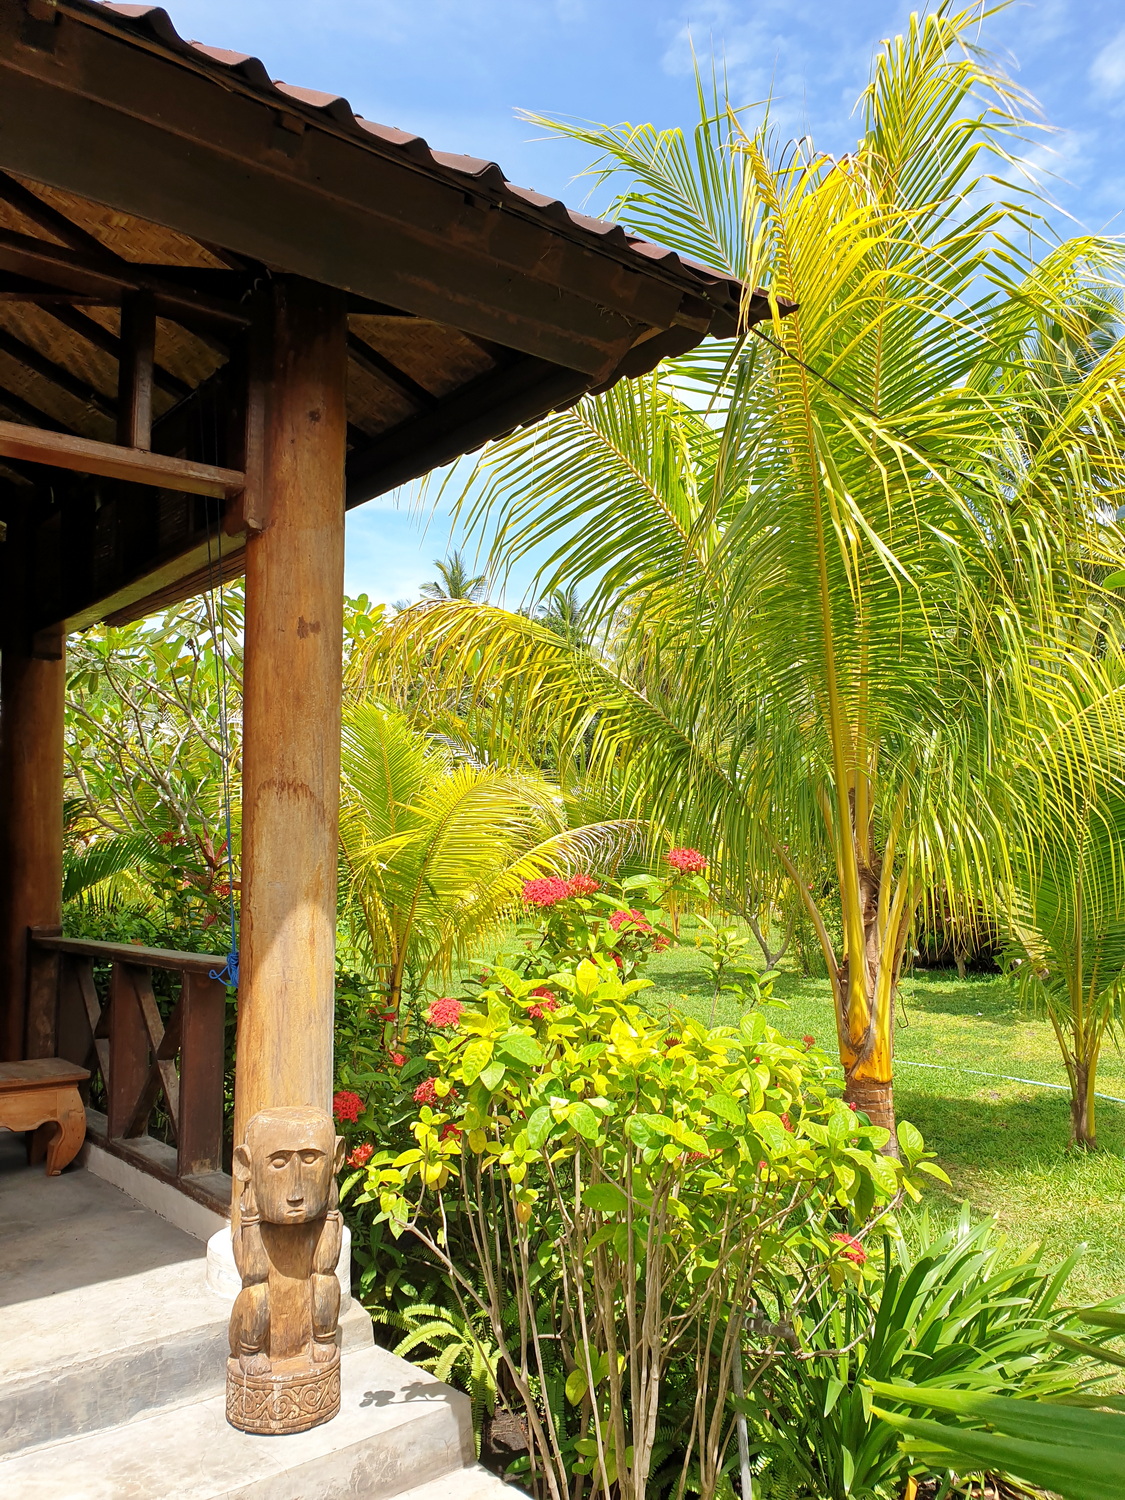 Photo from interior exterior Waiara Village guest house in Maumere on Flores Island in Indonesia